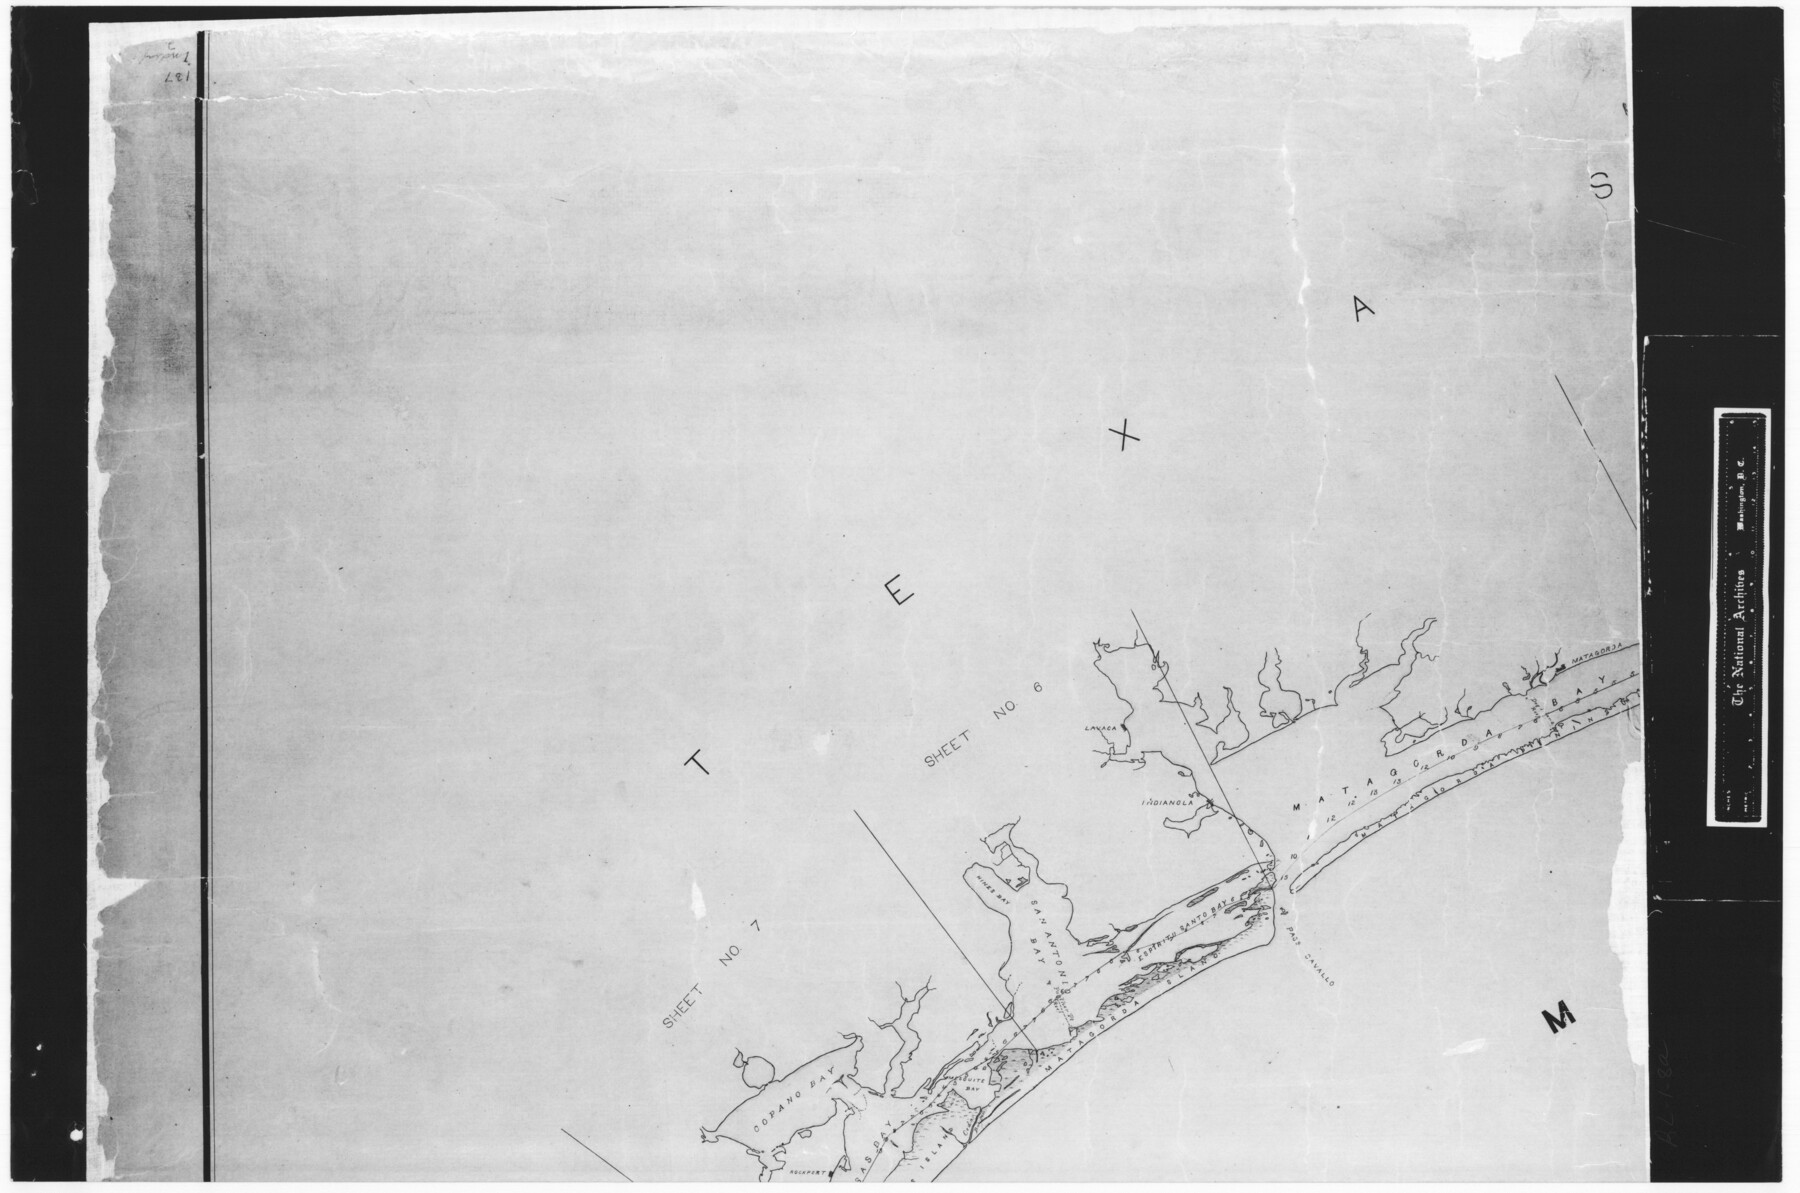 72691, Index sheet to accompany map of survey for connecting the inland waters along margin of the Gulf of Mexico from Donaldsonville in Louisiana to the Rio Grande River in Texas, General Map Collection